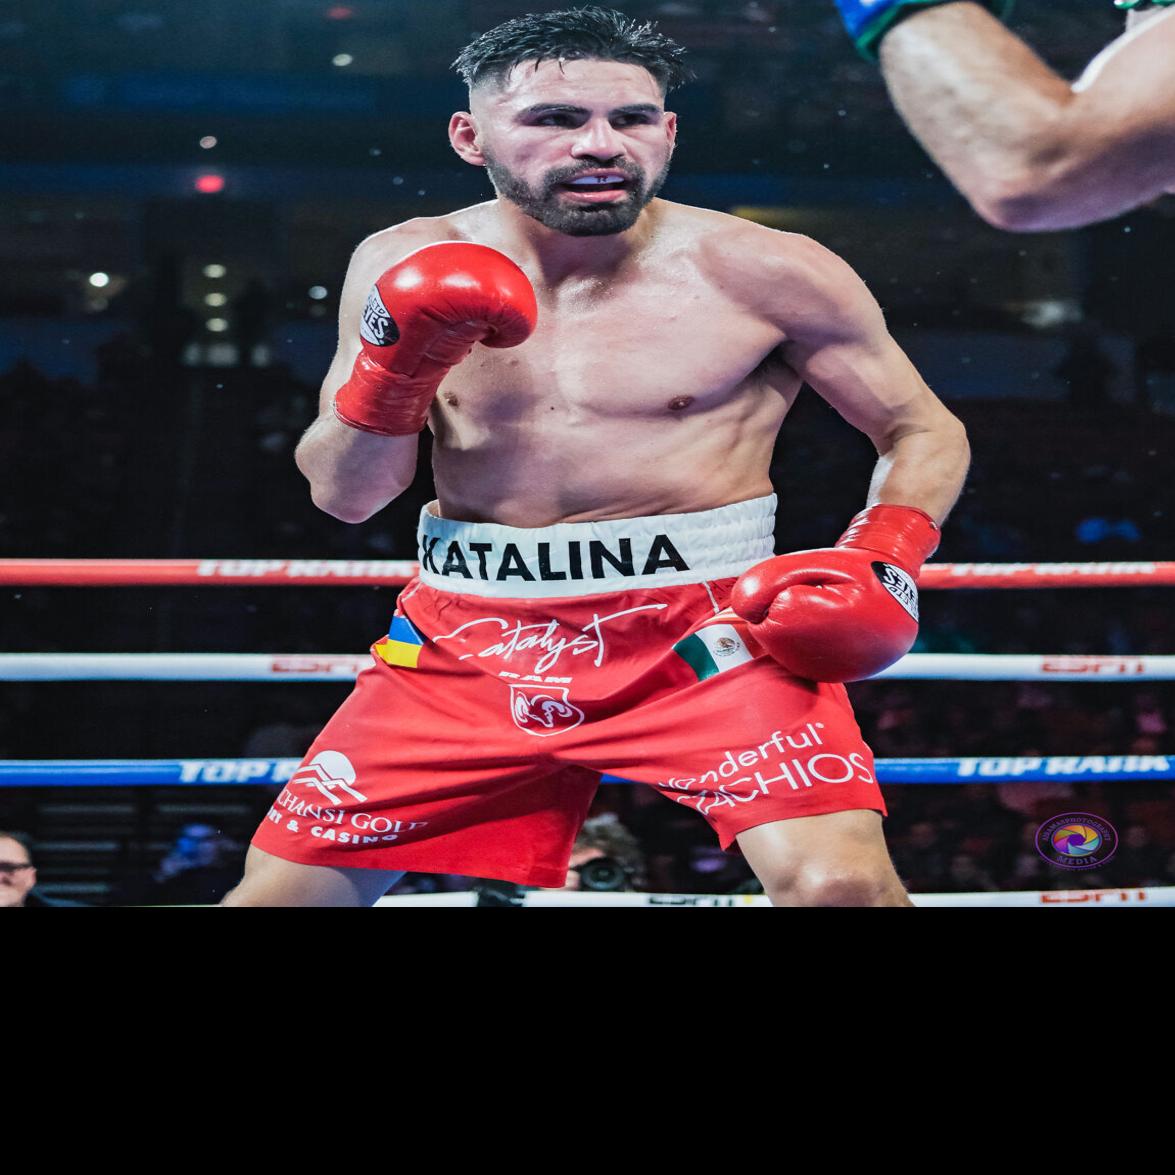 Valley native, professional boxer Jose Ramirez coming to the Save